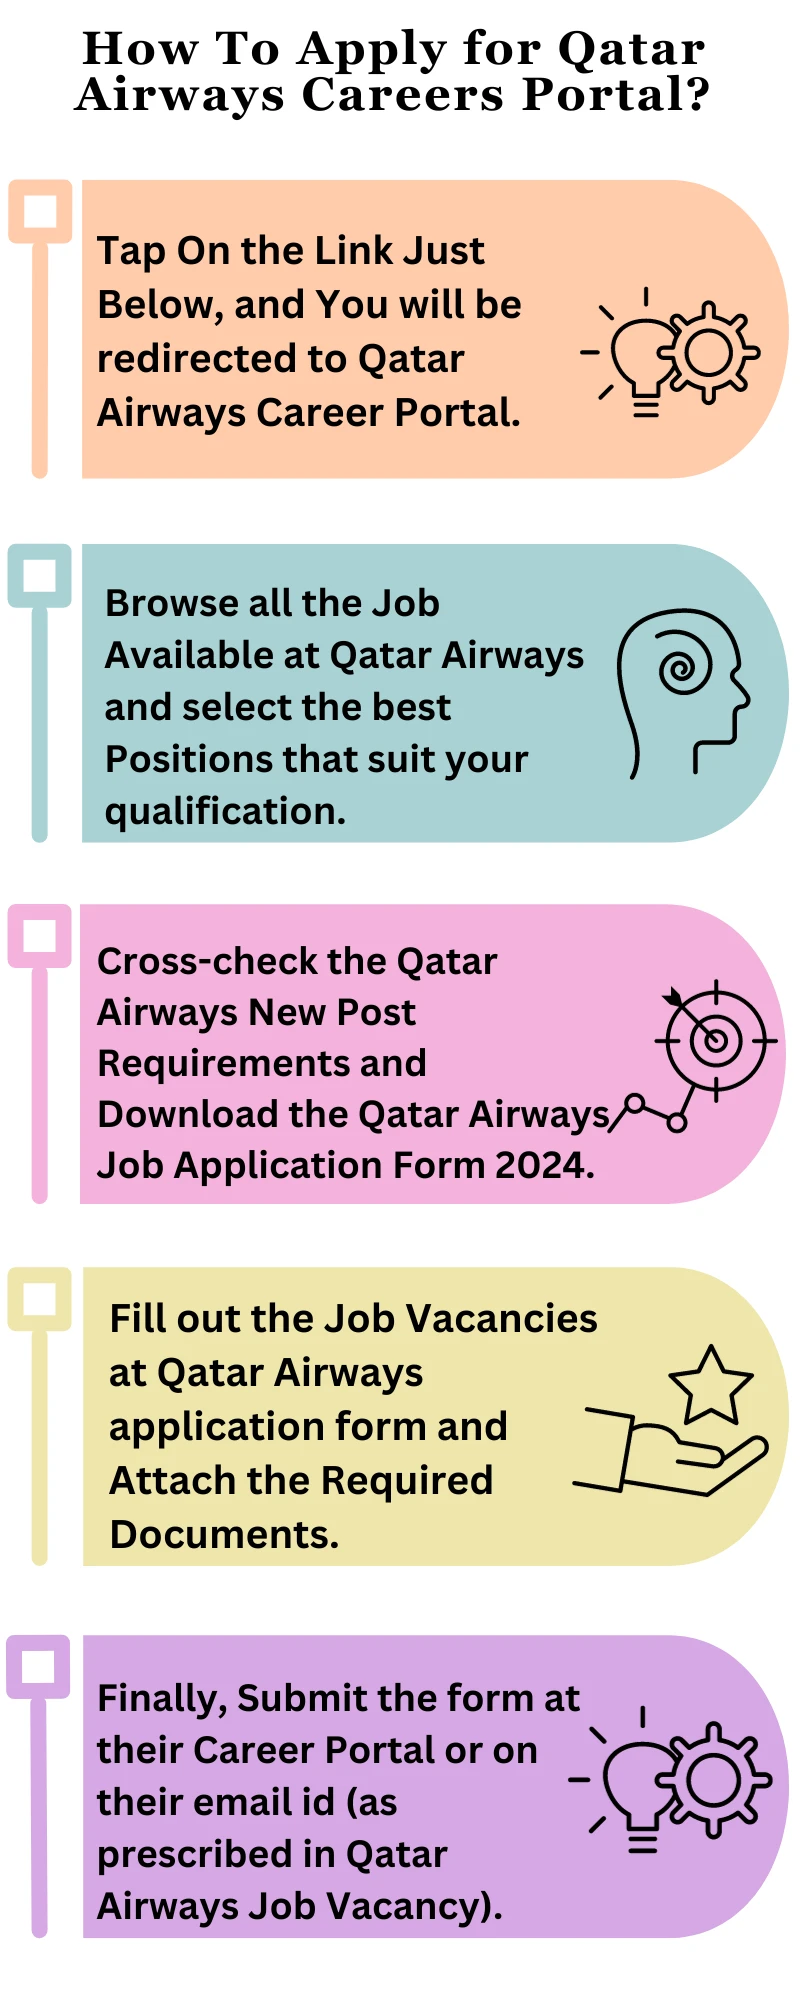 How To Apply for Qatar Airways Careers Portal?